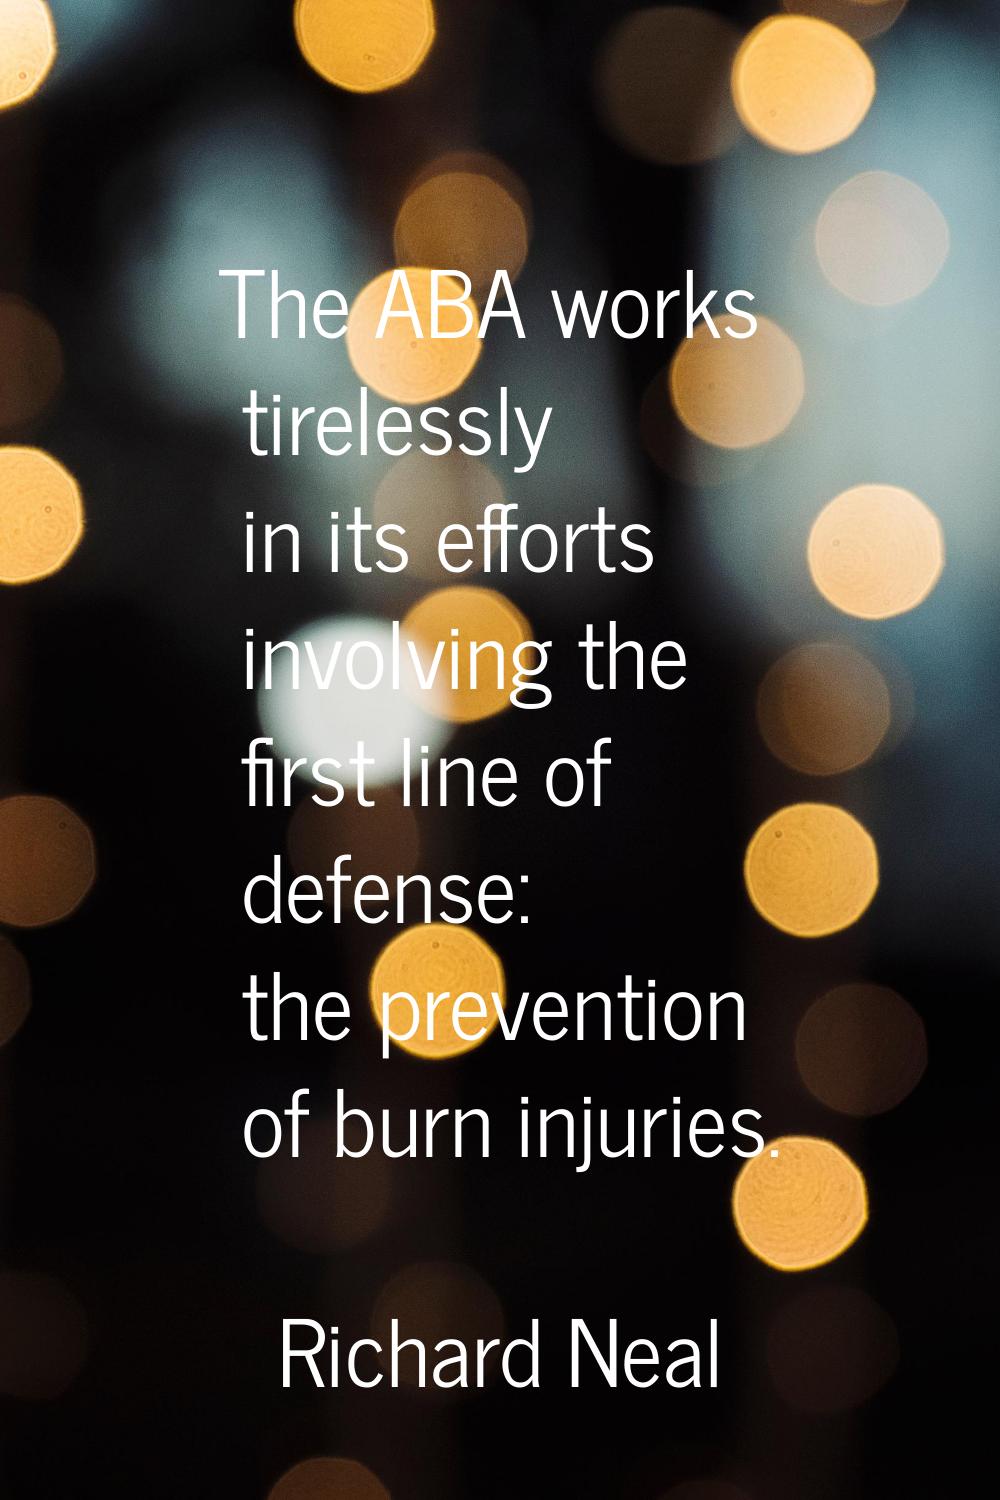 The ABA works tirelessly in its efforts involving the first line of defense: the prevention of burn